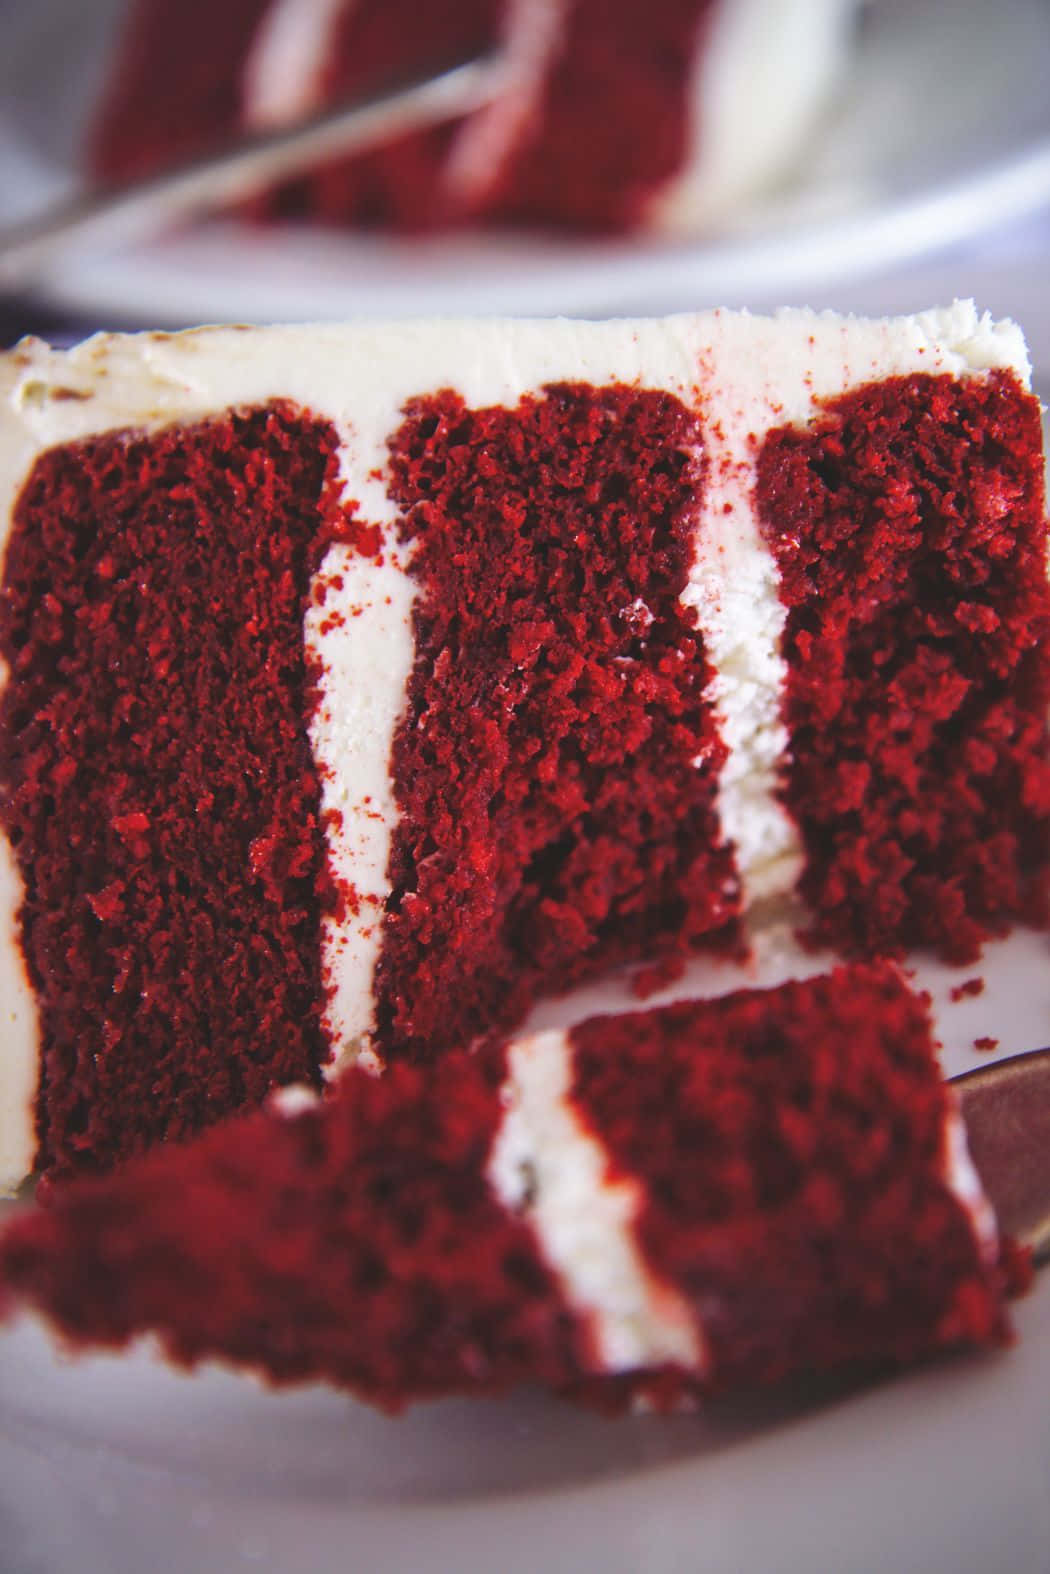 Delicious Red Velvet Cake with Cream Cheese Frosting Wallpaper